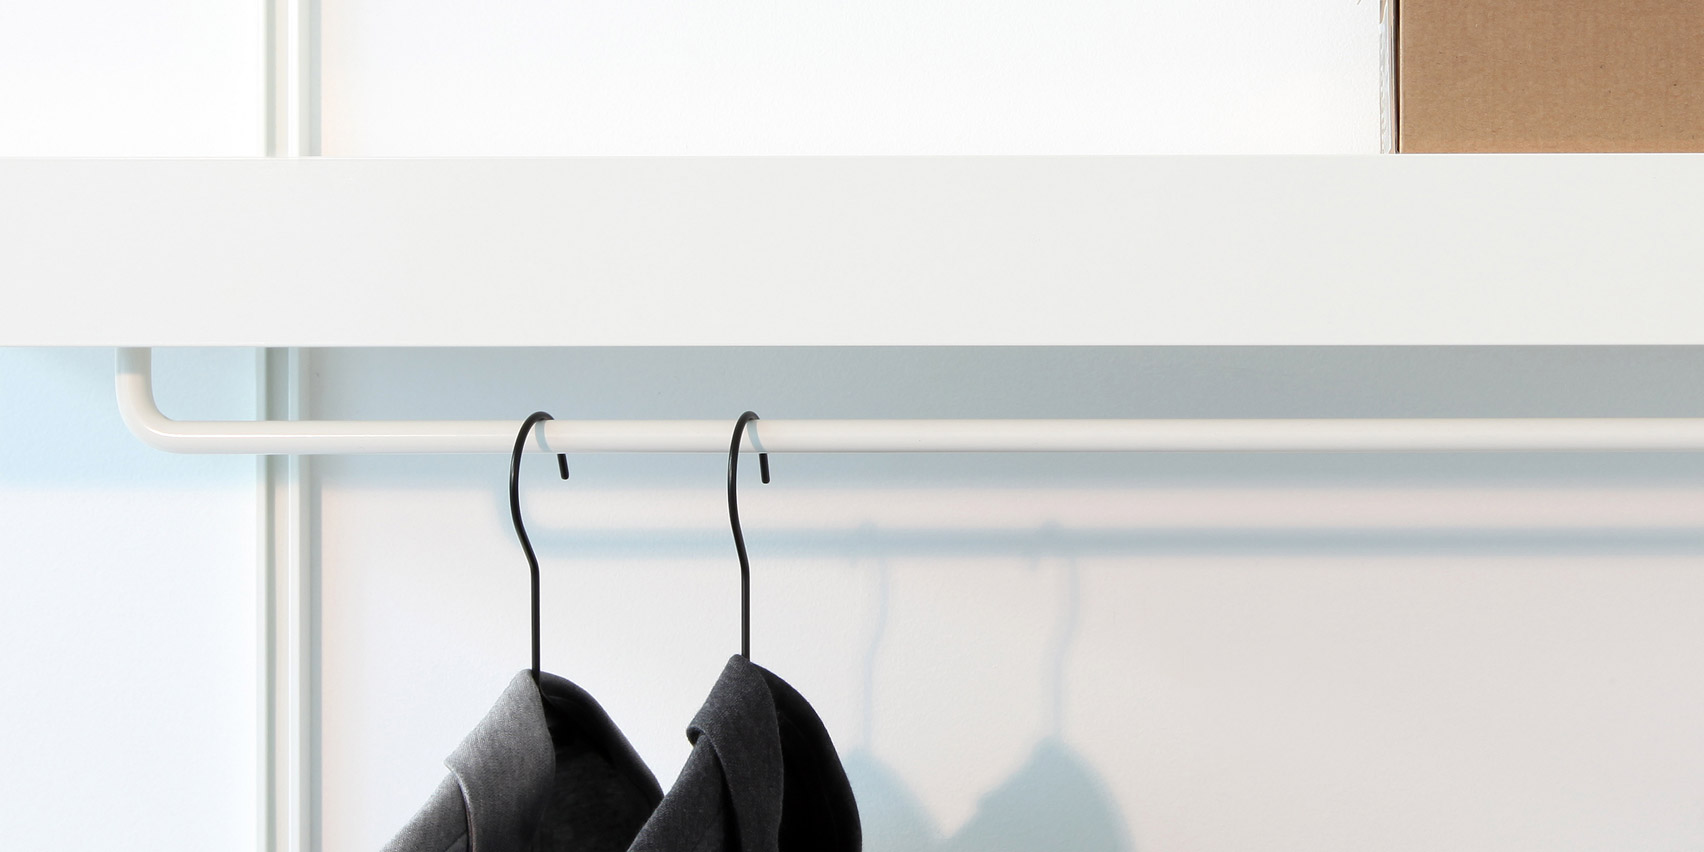 ON&ON's shelving system with a clothes hanger unit